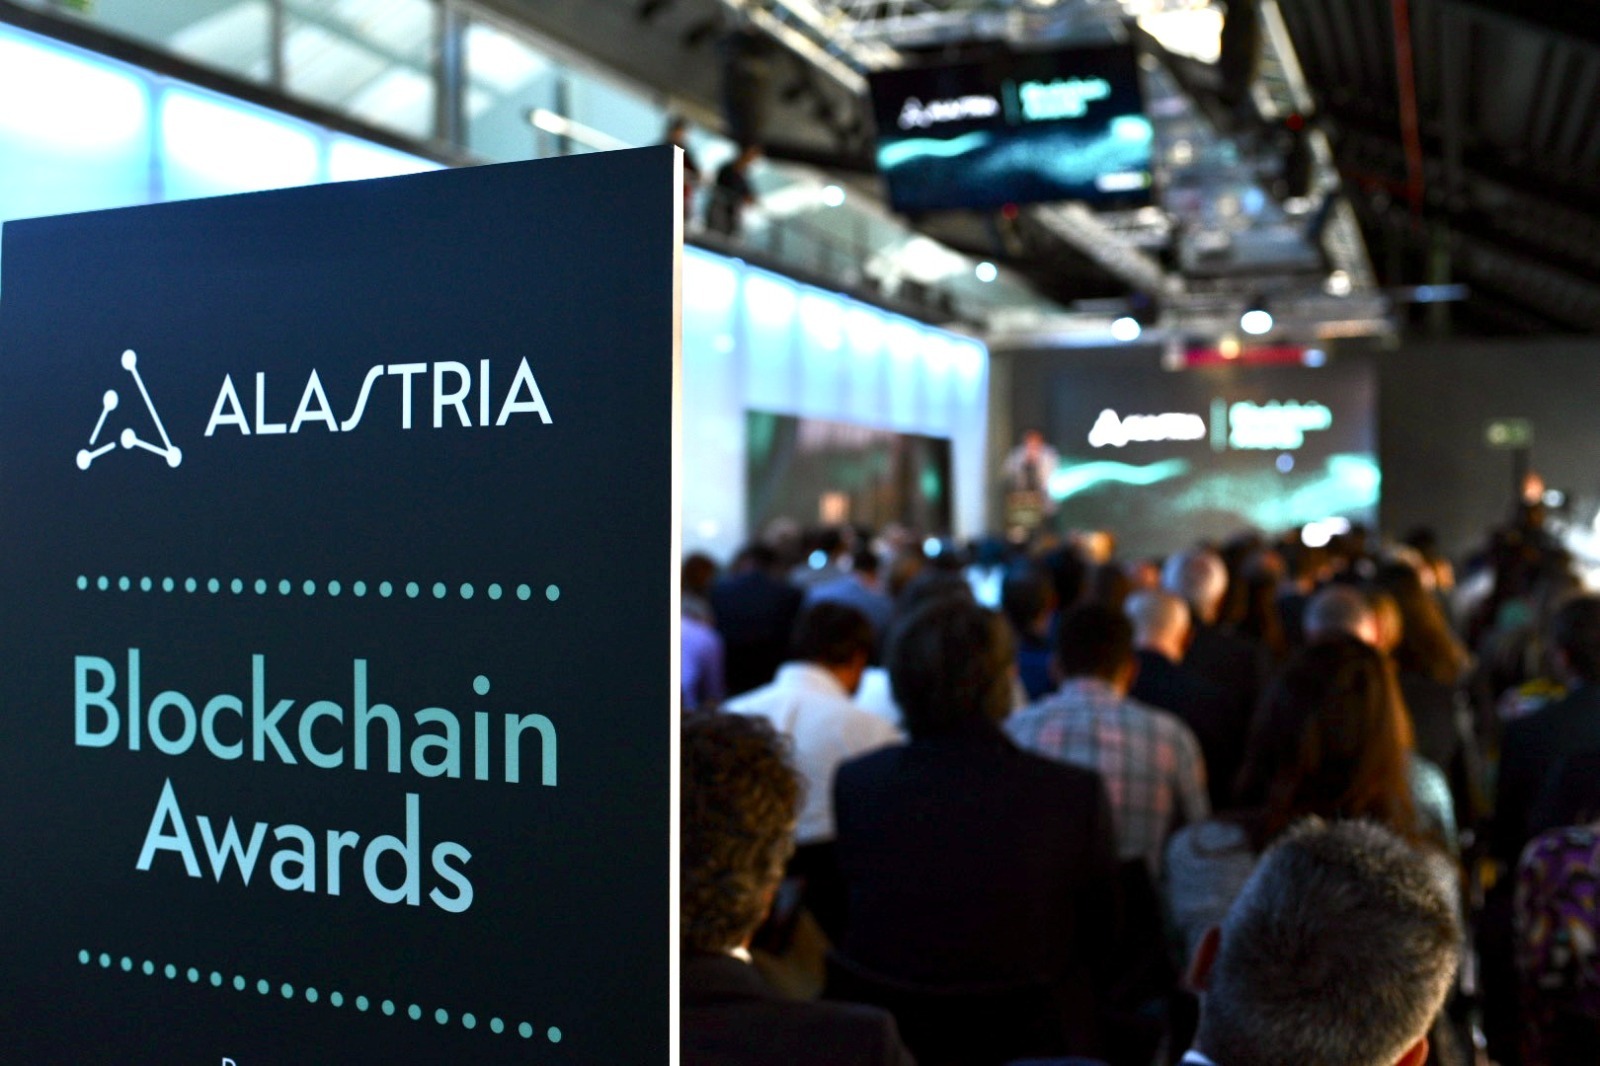 The second edition of the Blockchain Awards lifts off